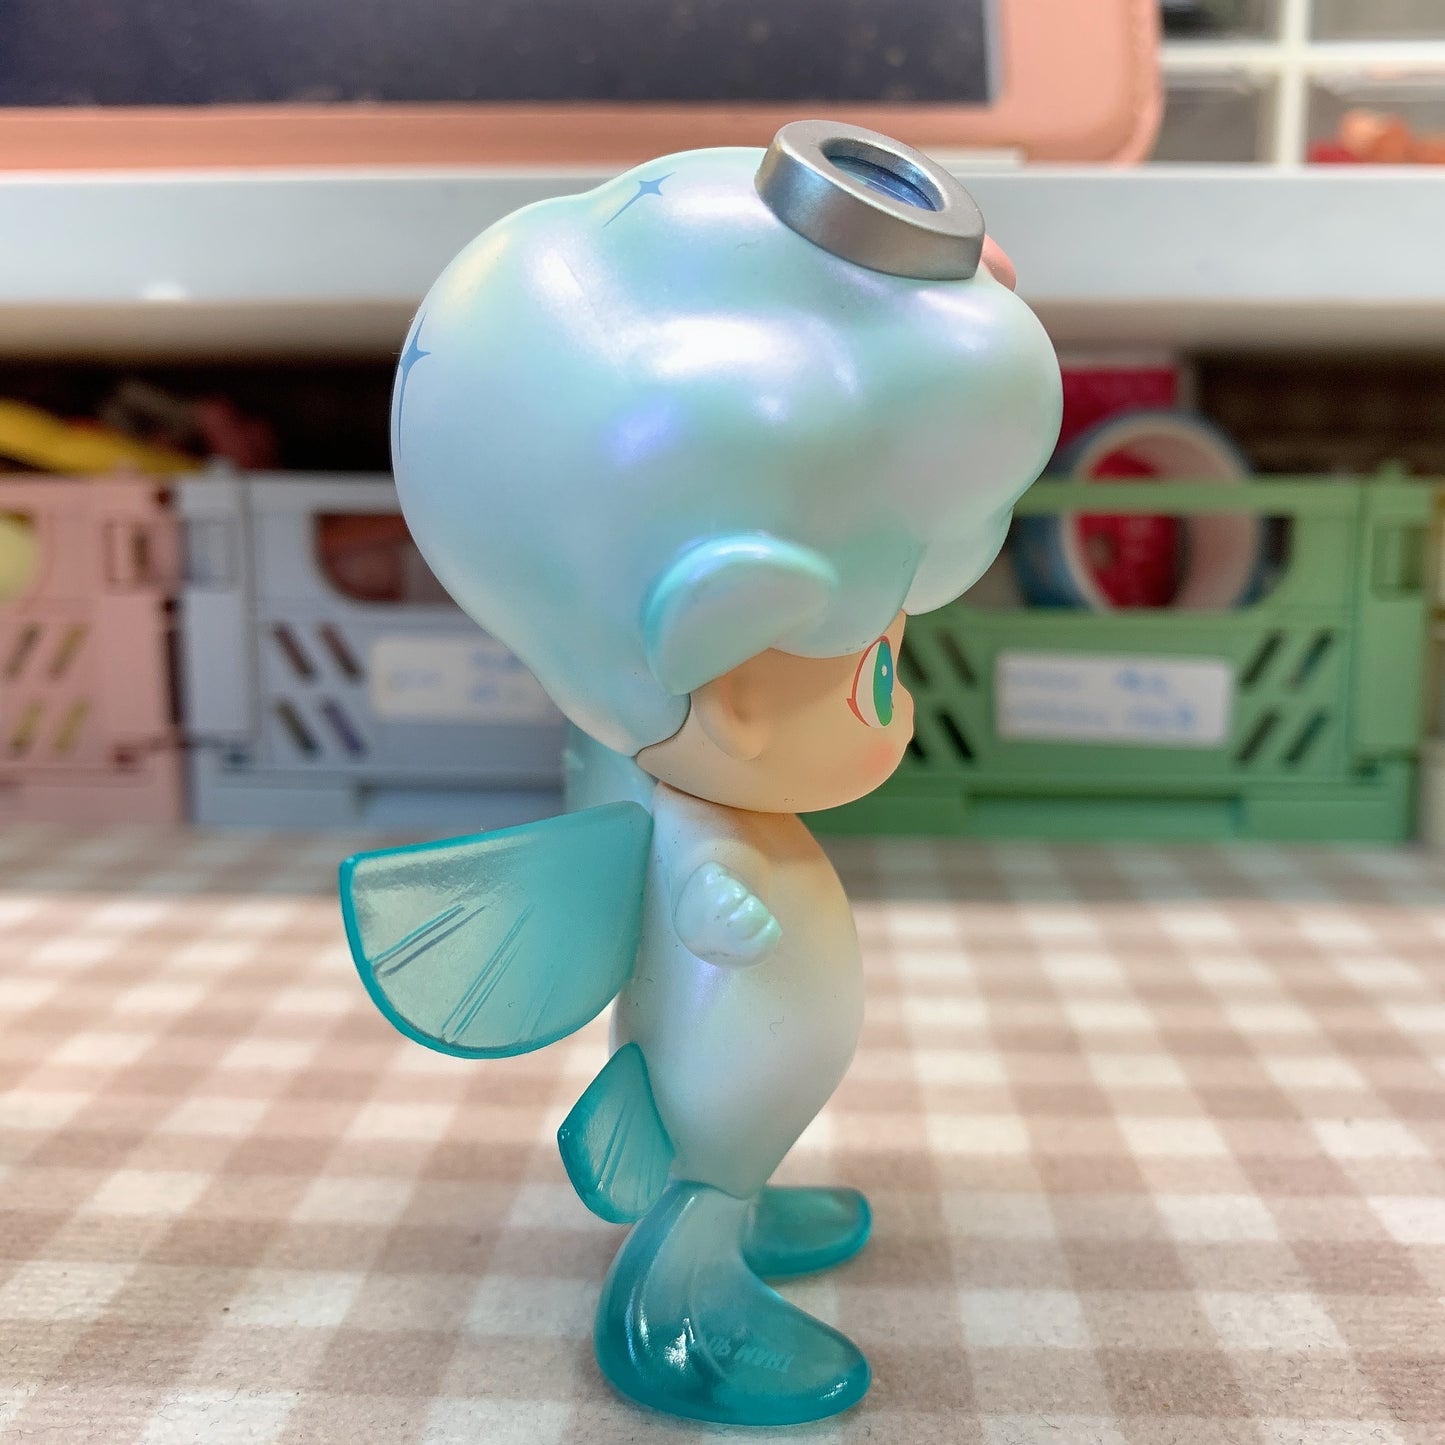 【PRELOVED and SALE 】POPMART Dimoo blind box toy Aquarium series Flying Fish